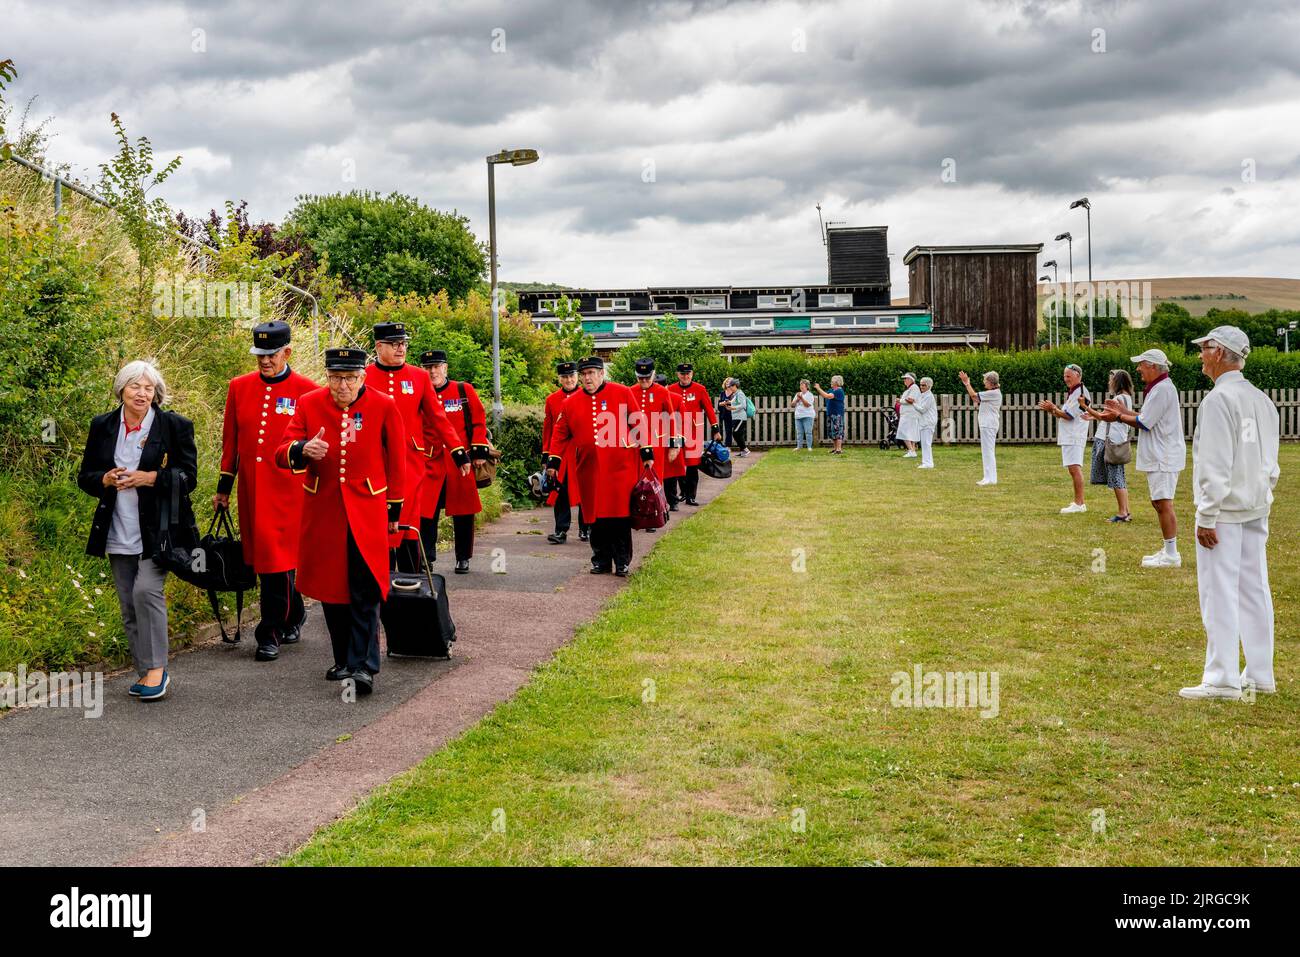 The Chelsea Pensioners Bowls Team Arrive In Lewes And Are Applauded By The Local Bowls Team, Lewes, East Sussex, UK. Stock Photo